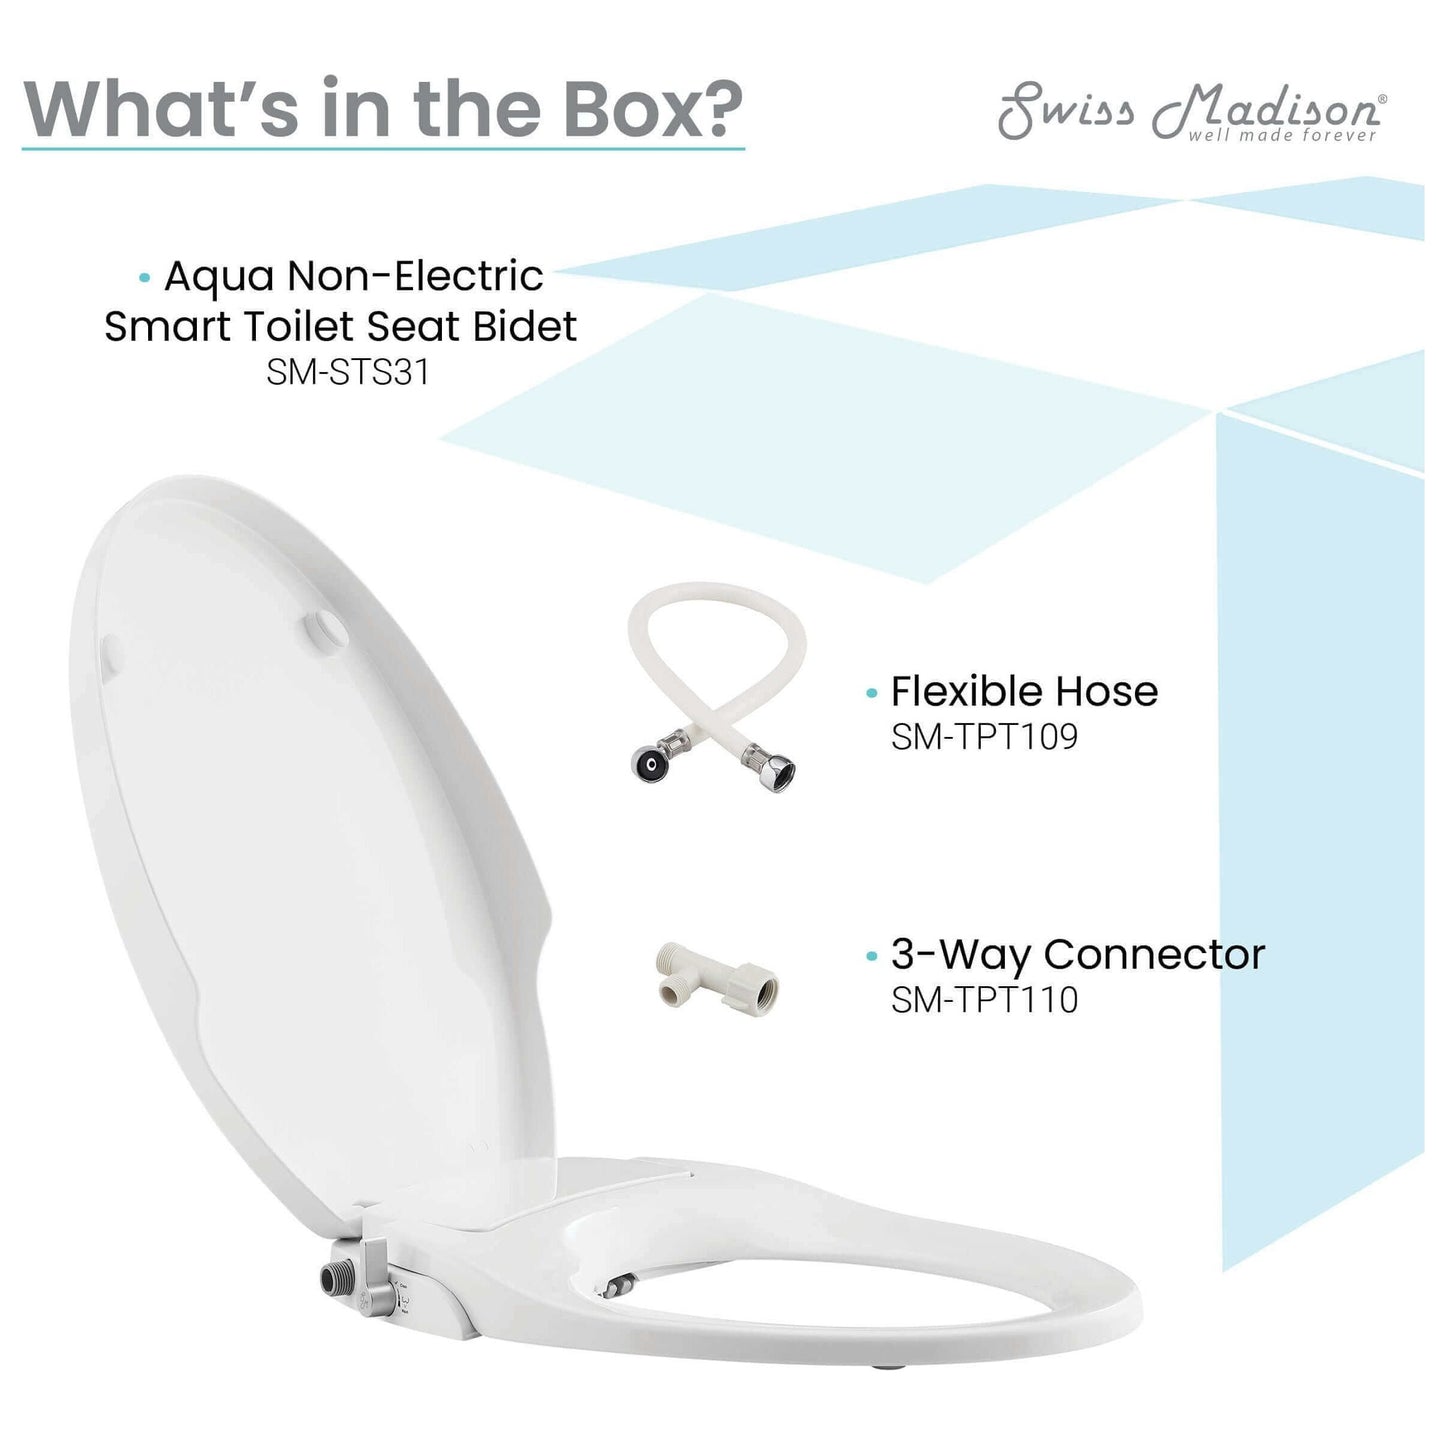 Aqua Non-Electric Smart Toilet Seat Bidet - angled view with list of what is in the box